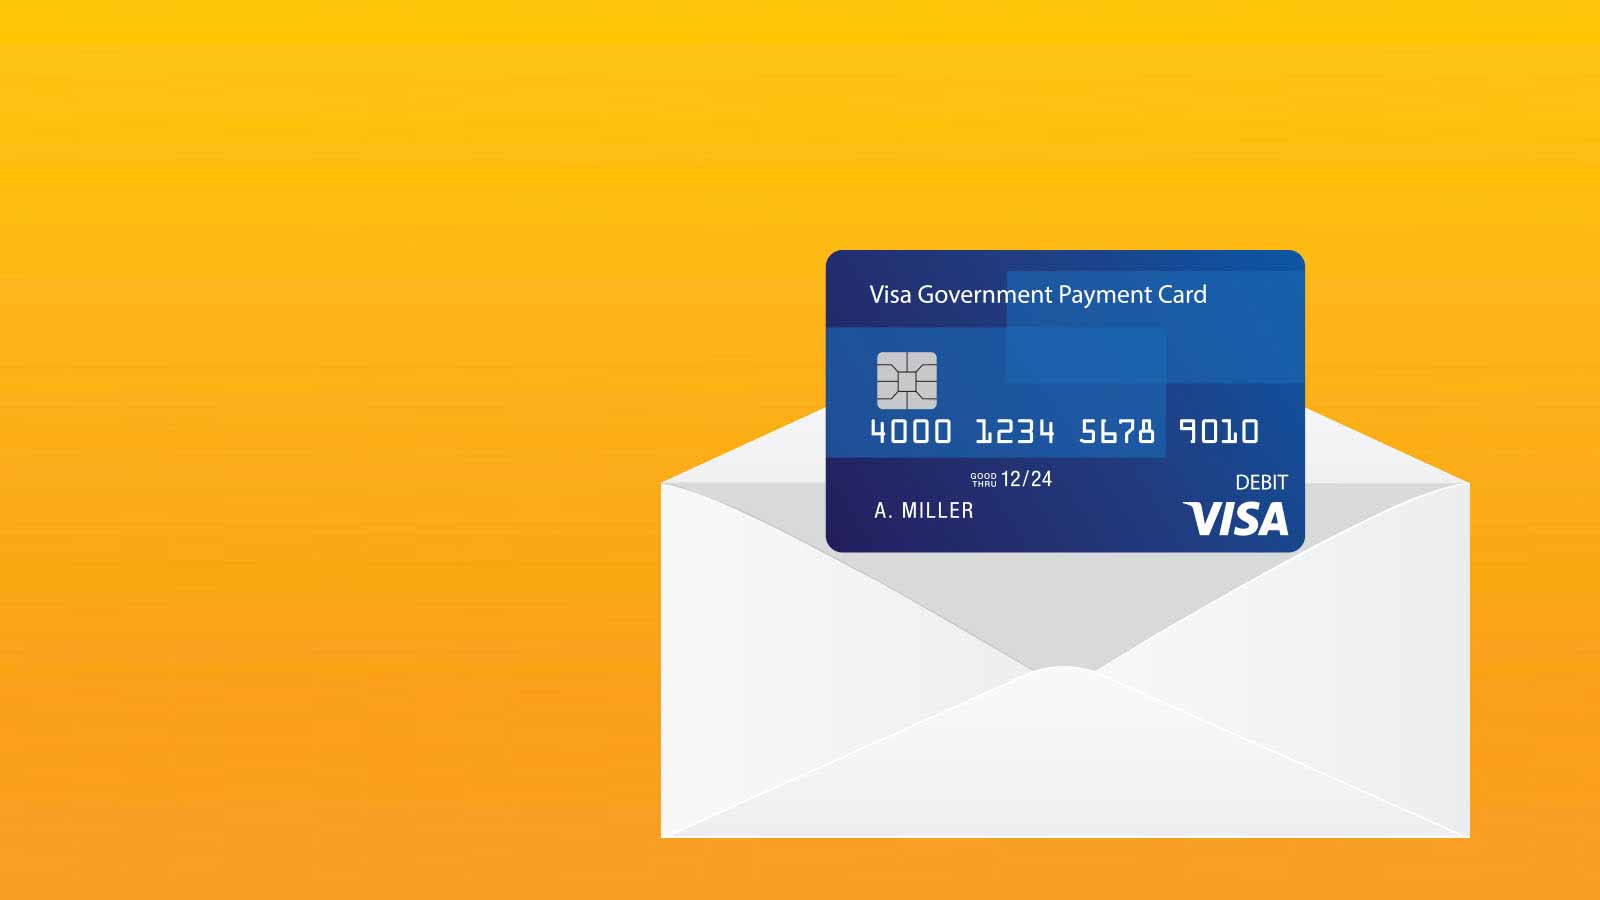 Illustration of a Visa Government Payment Card coming out of an envelope.